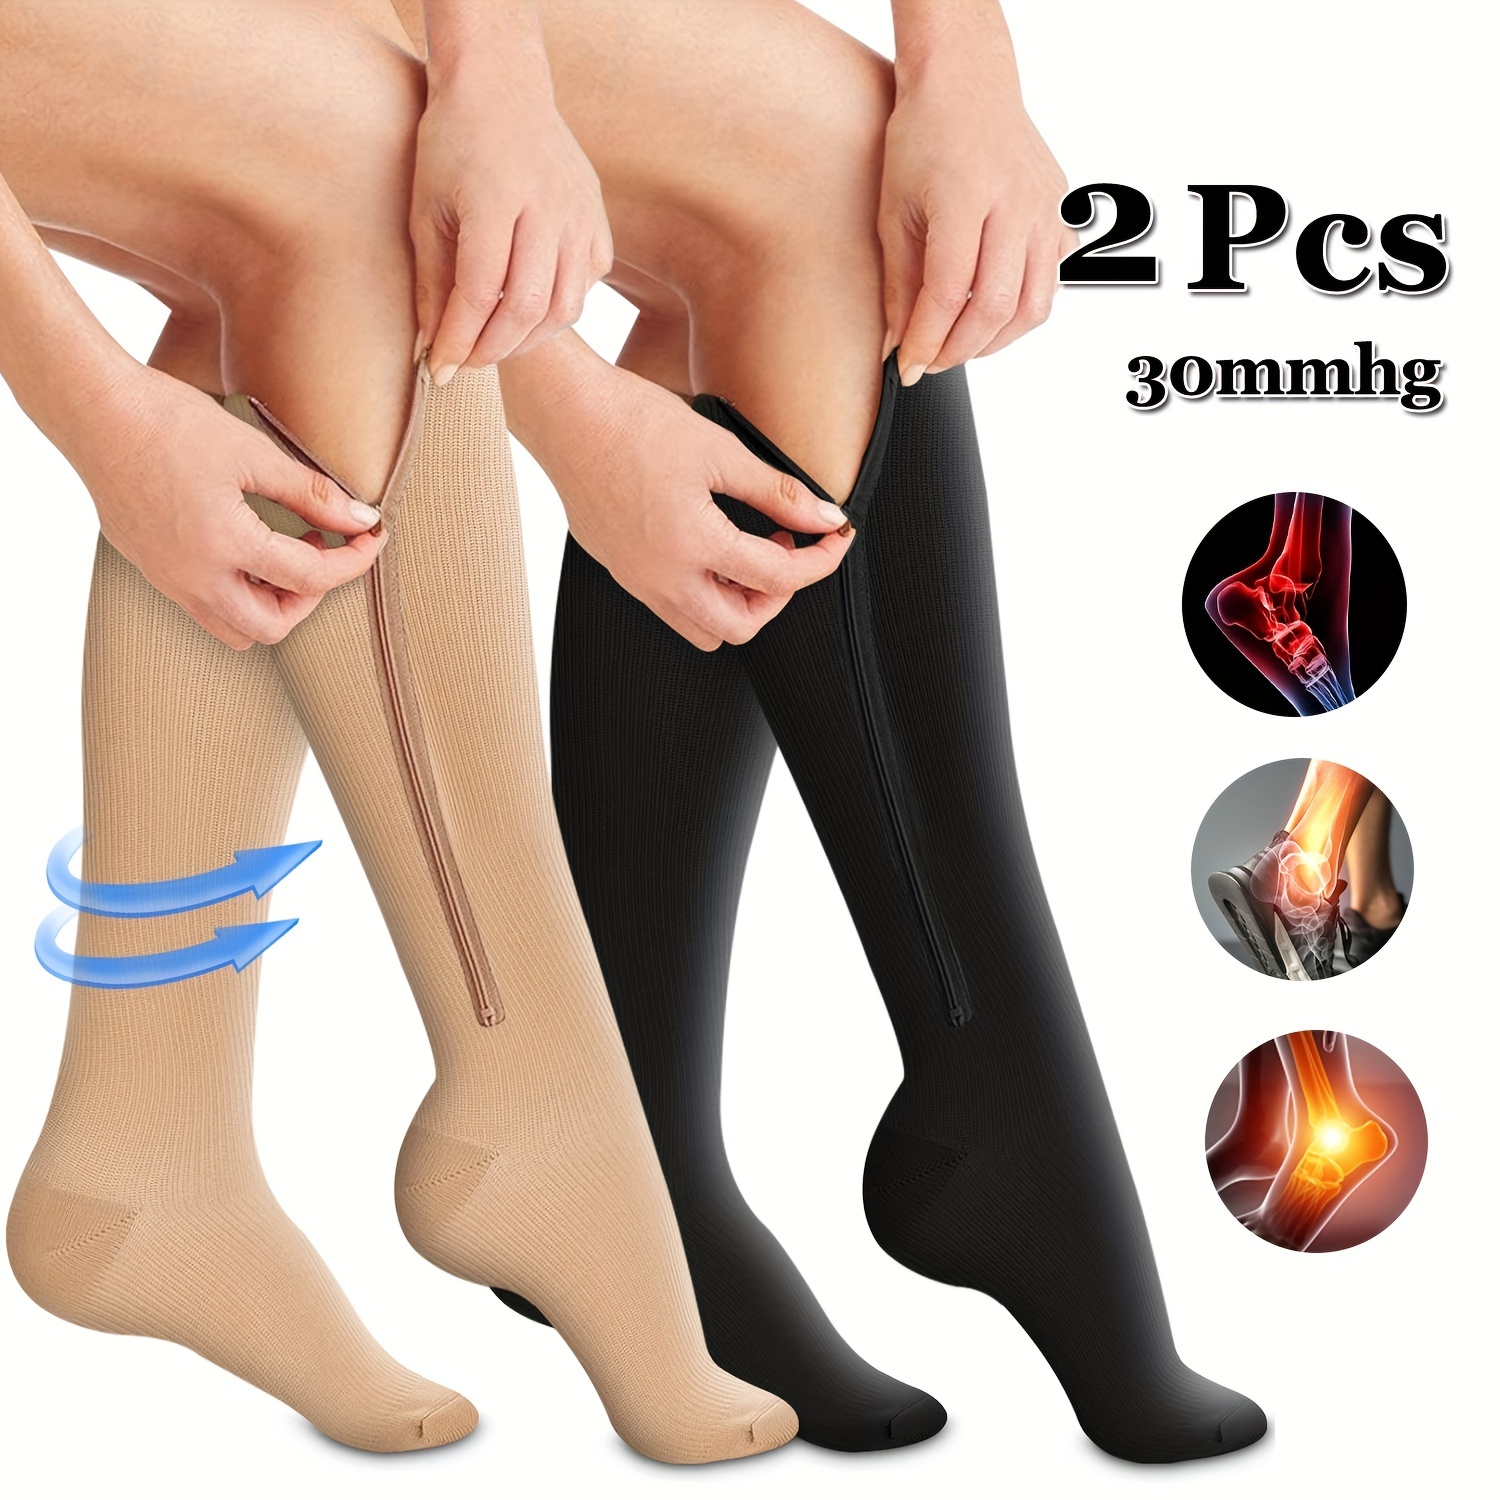 Compression Stockings With Zipper For Varicose Veins